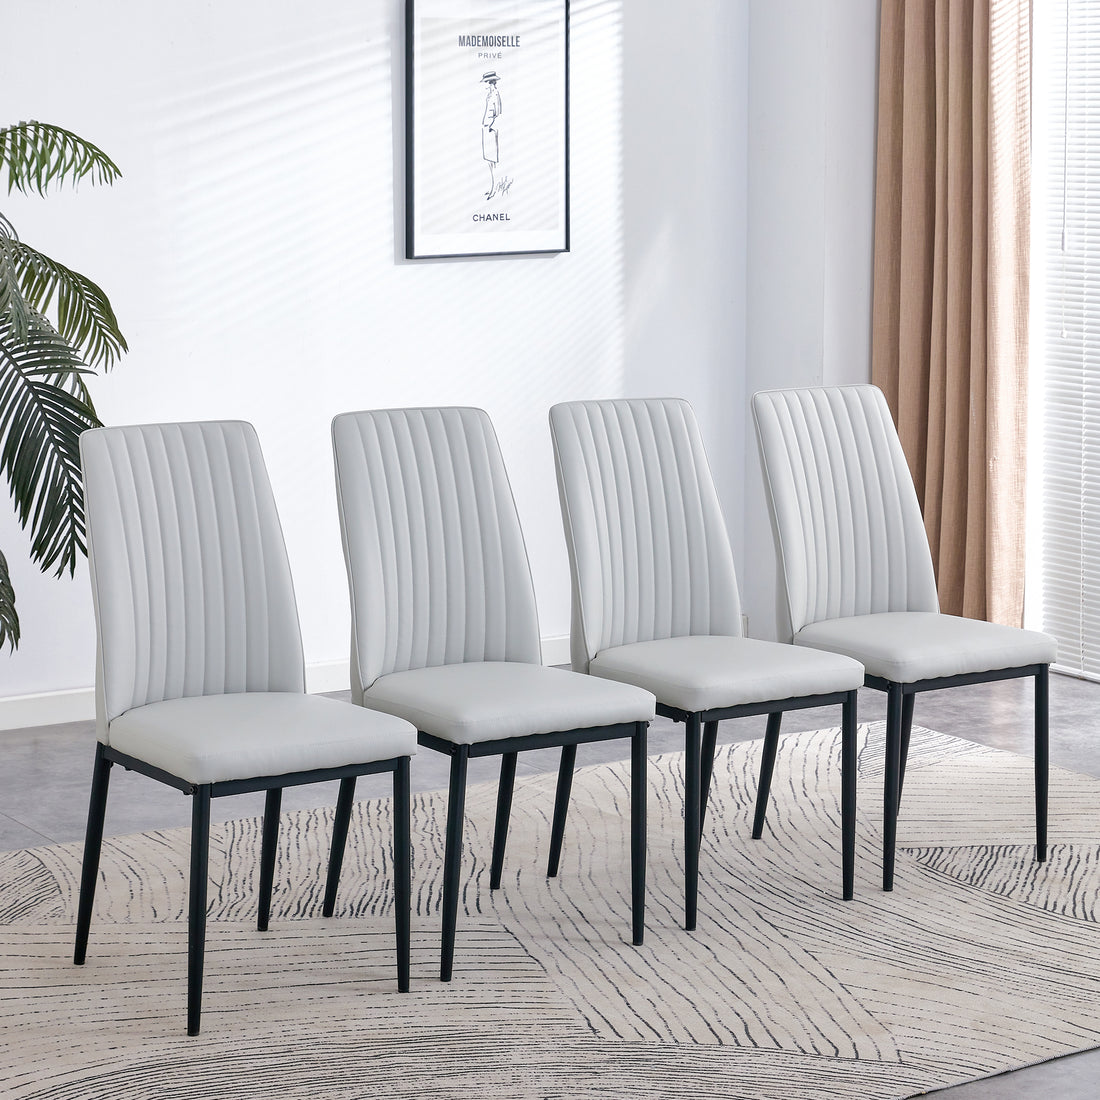 Dining Chairs Set of 4, Comfortable Upholstered